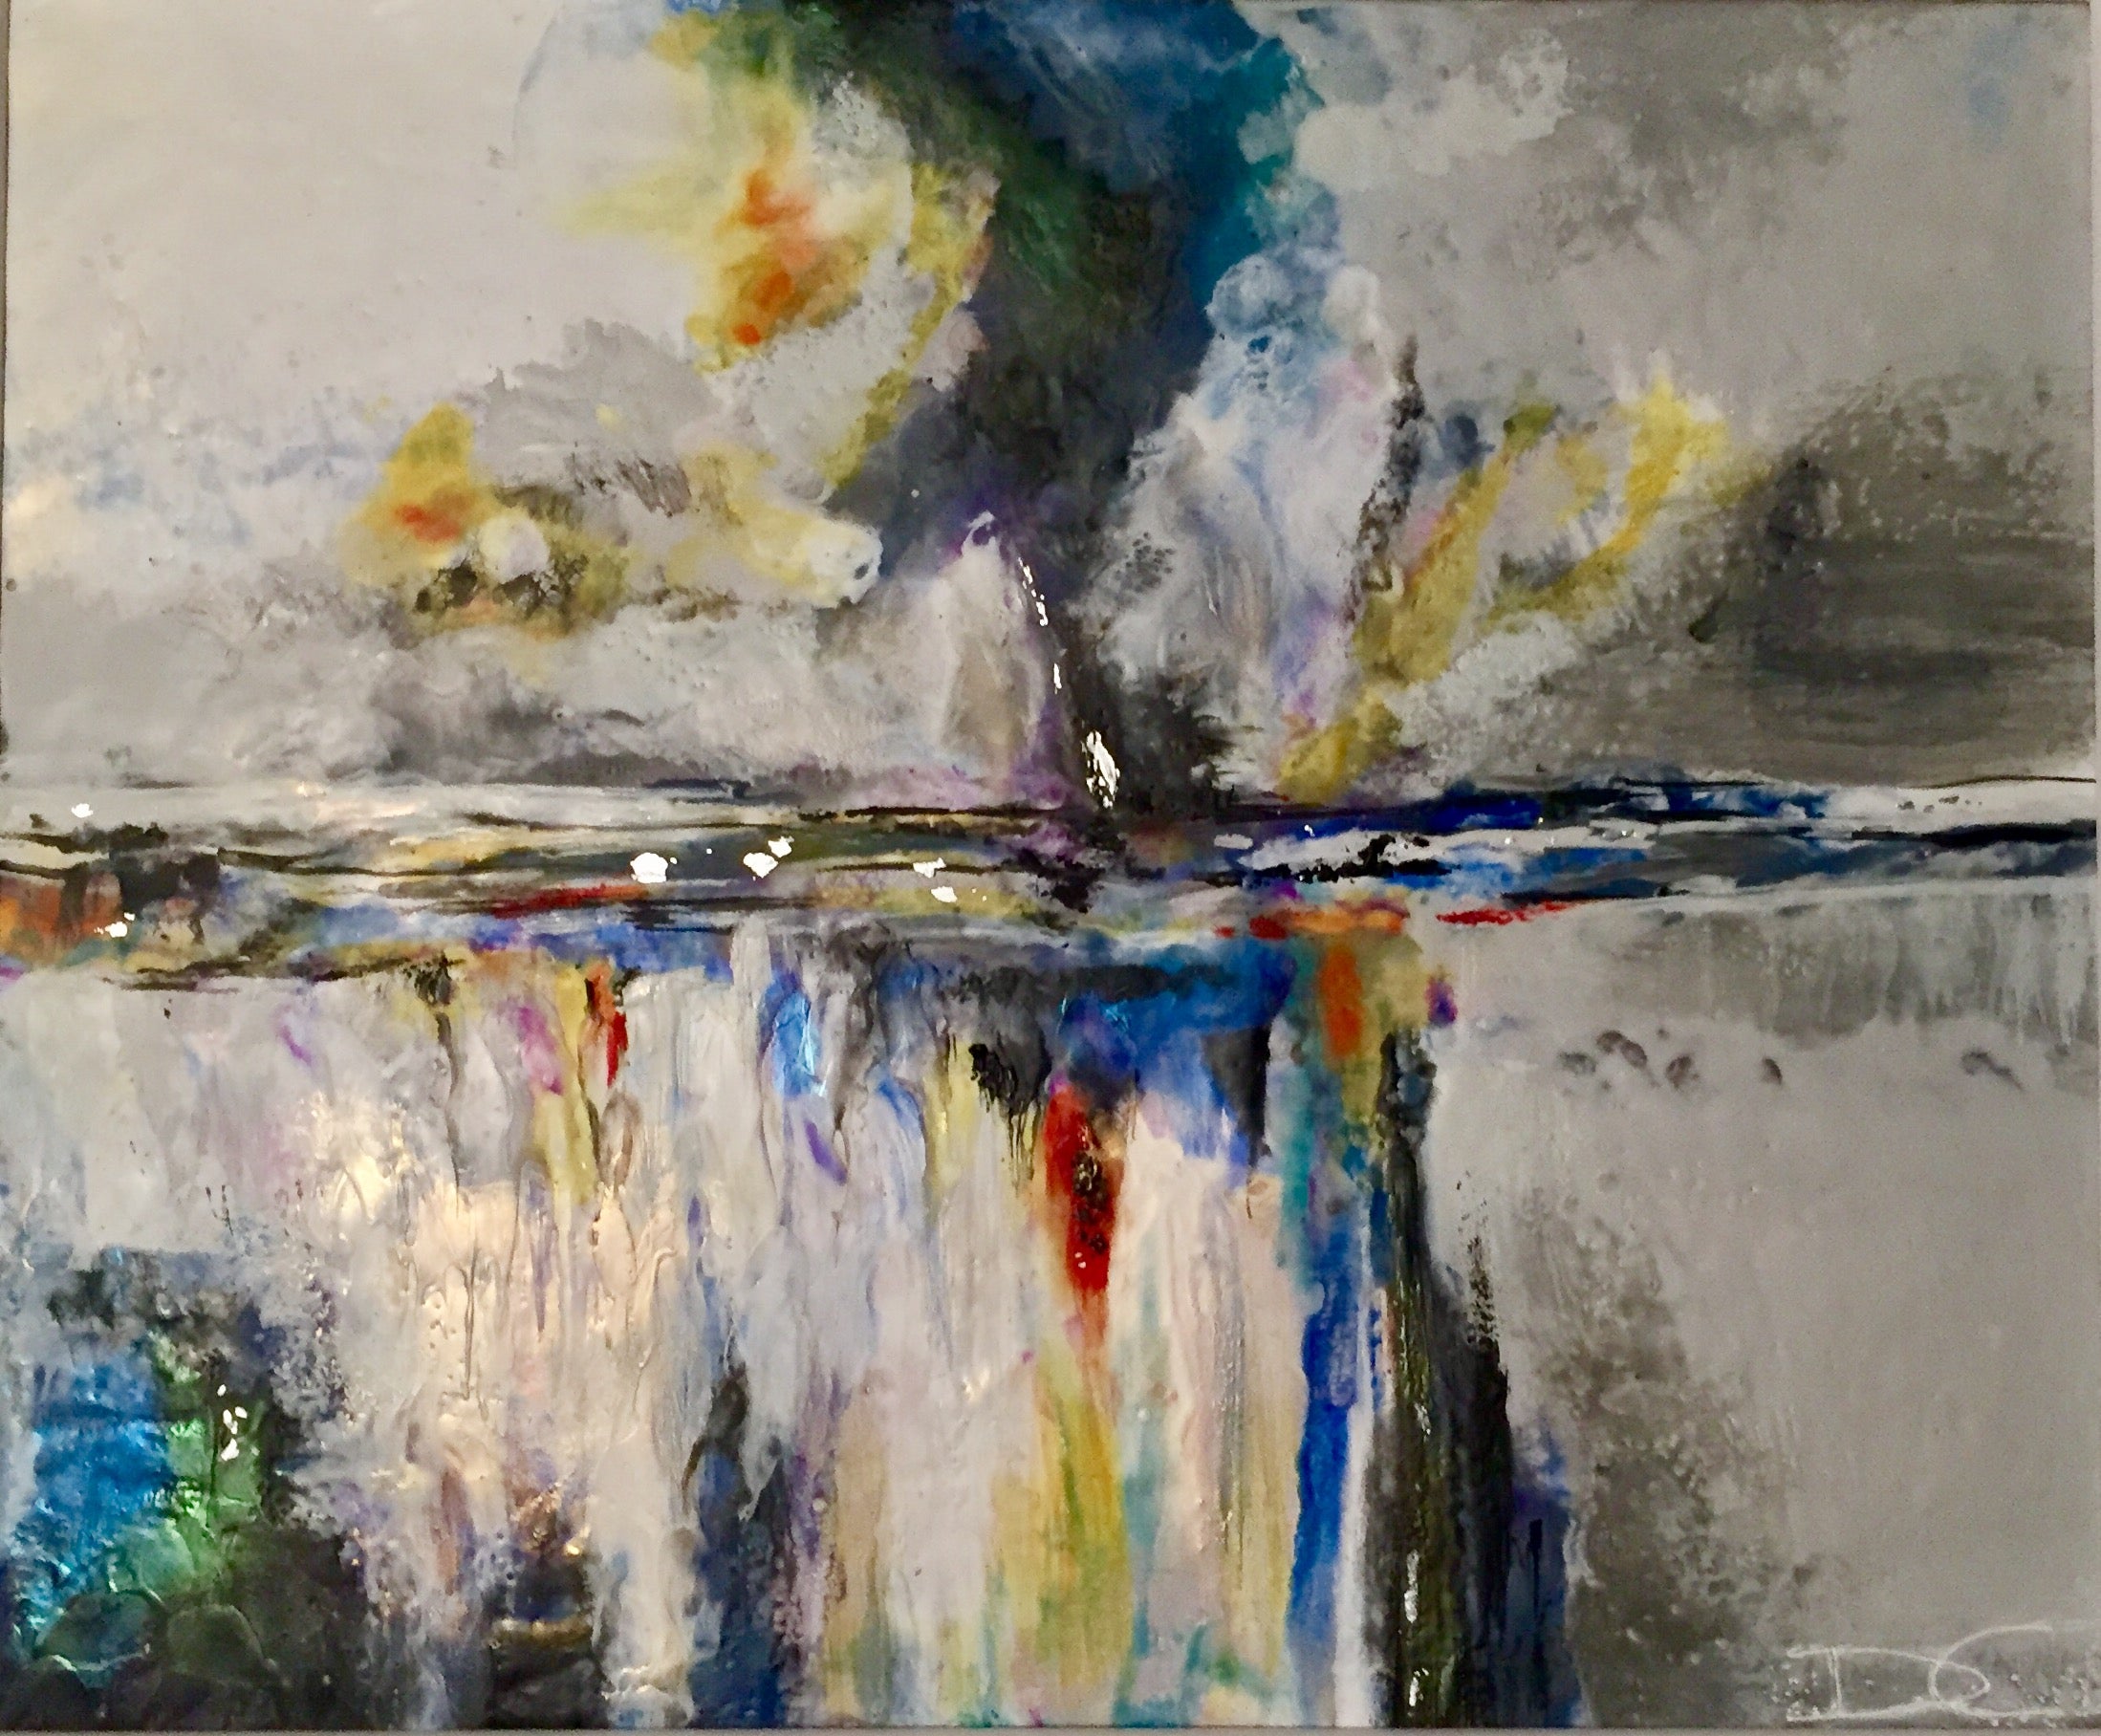 A colorful abstract painting which appears to feature a large body of water covered in rainbows